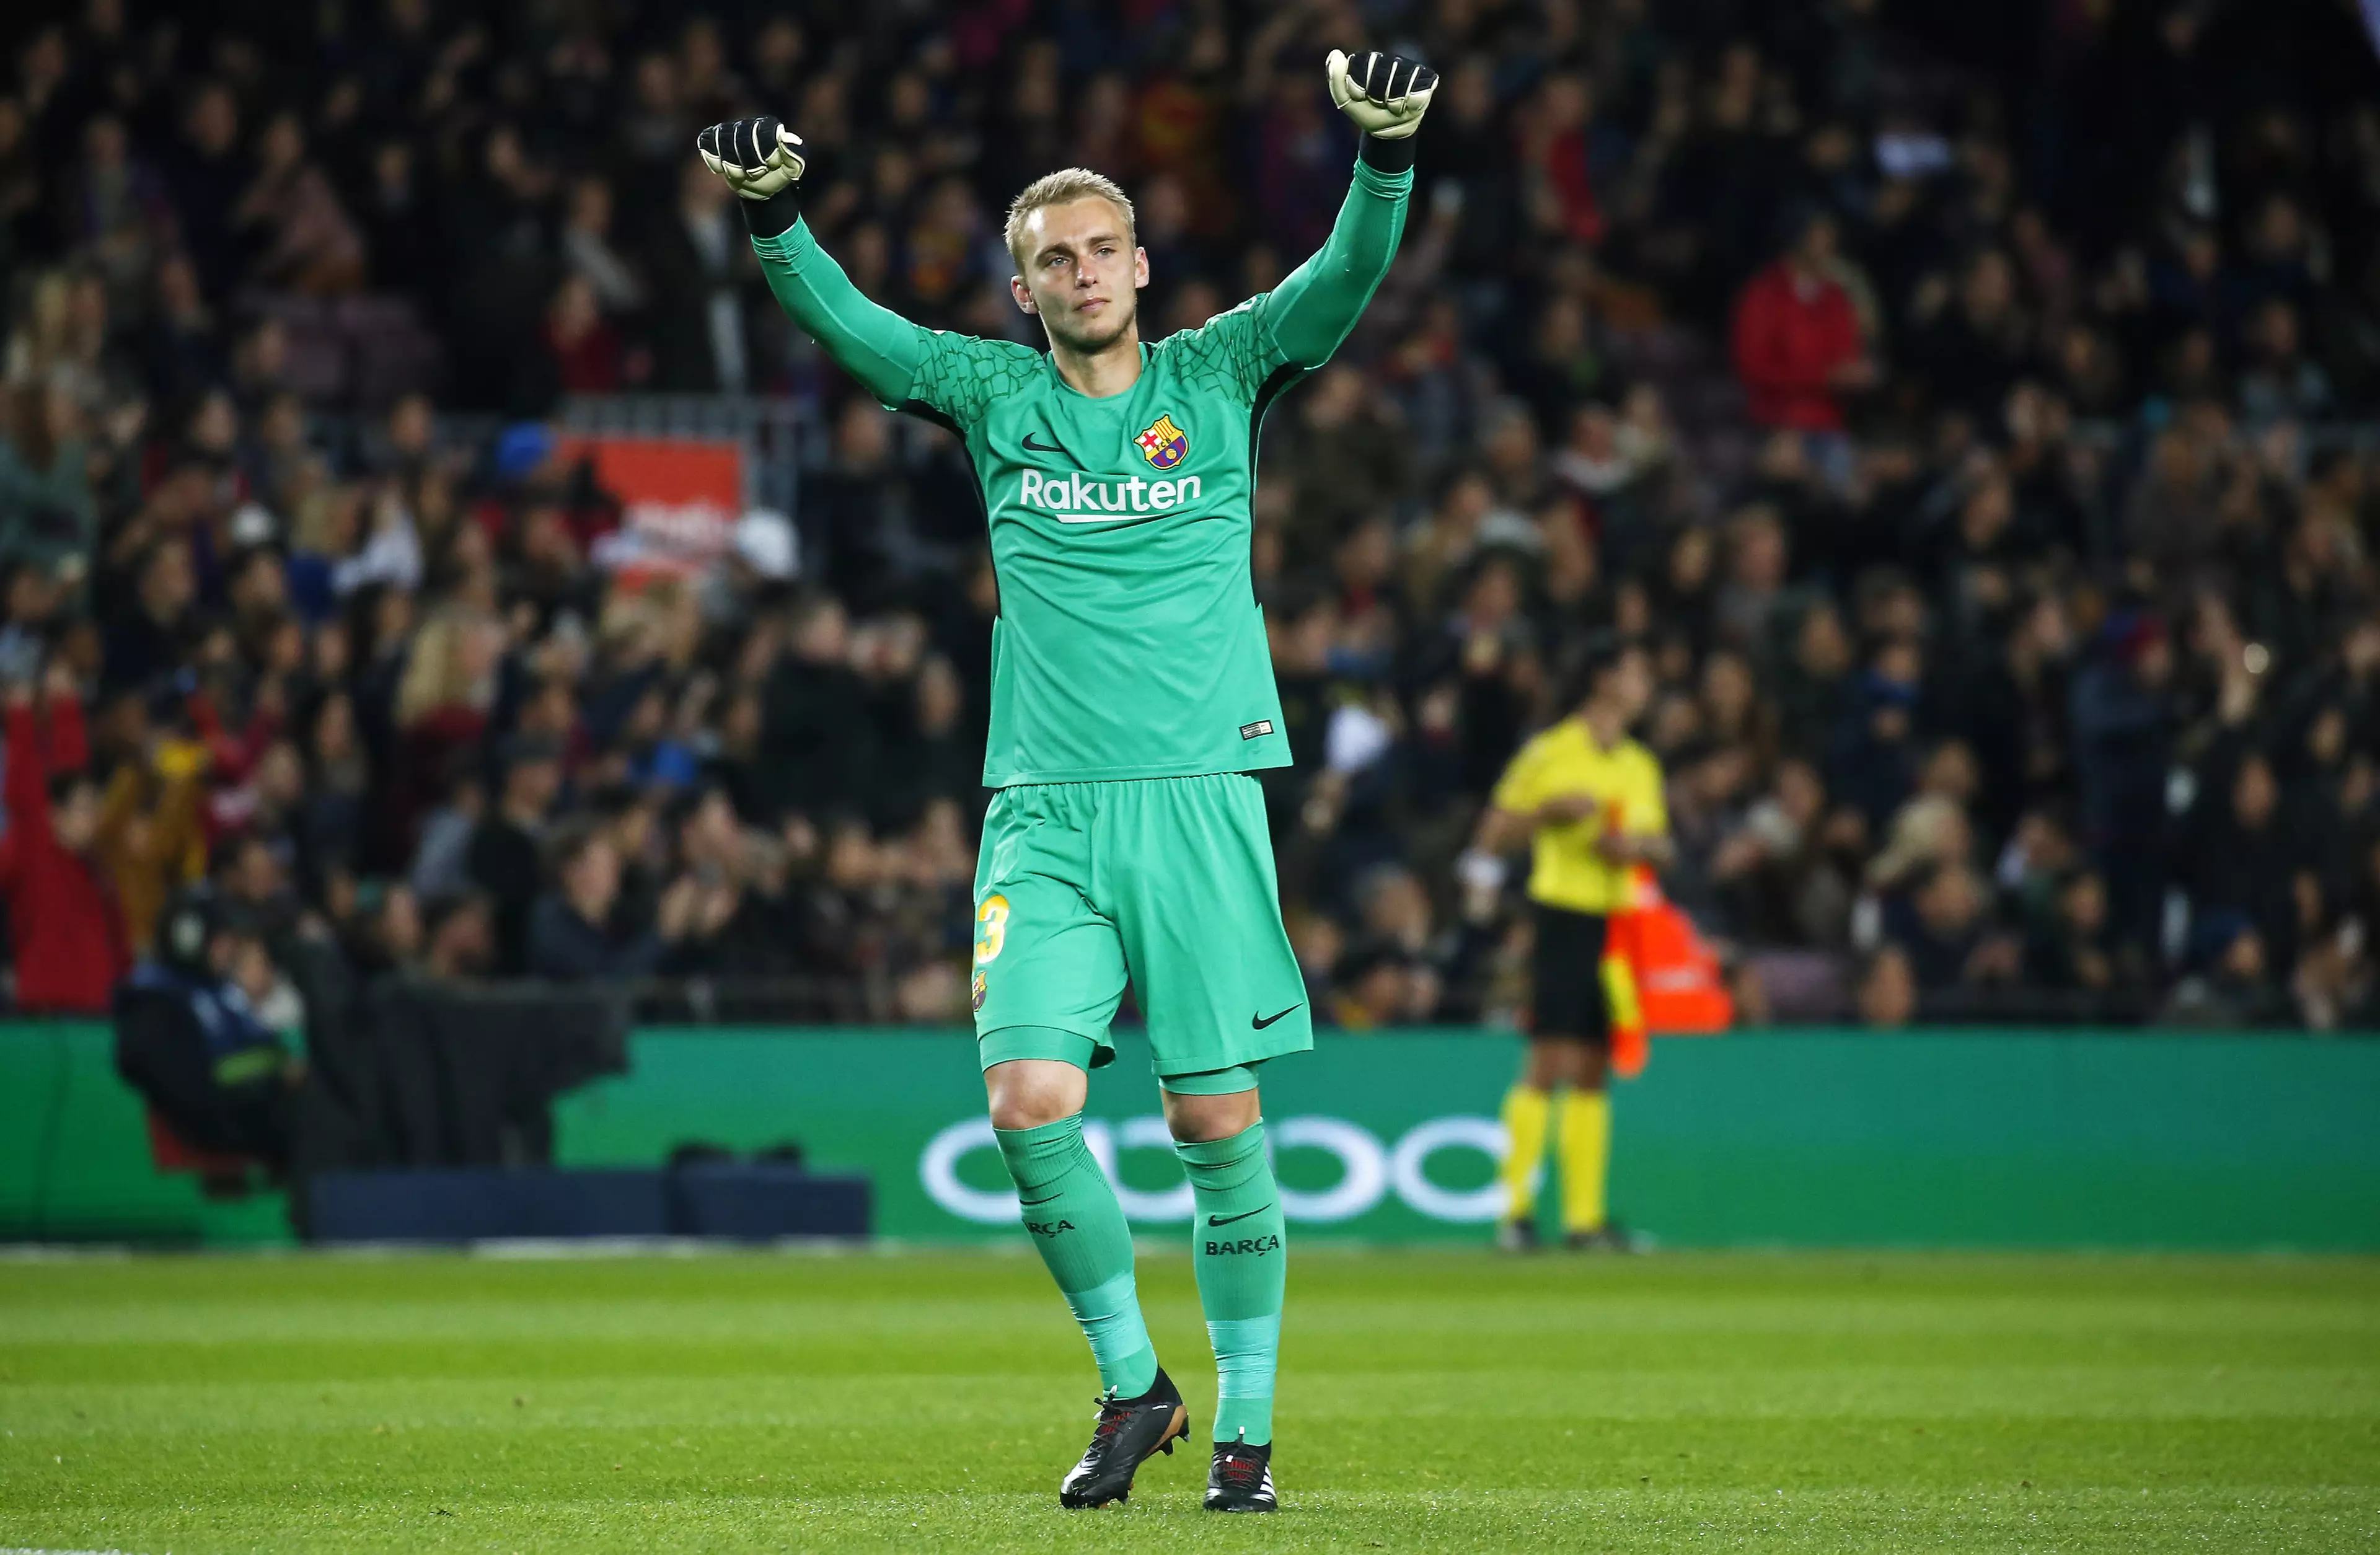 Barca's Cillessen obviously wants out of the Camp Nou. Image: PA Images